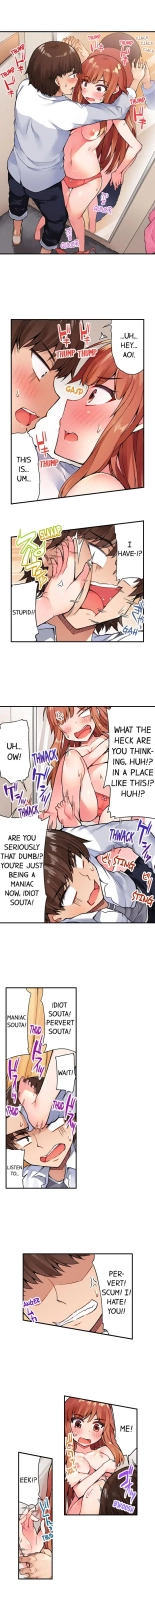 Traditional Job of Washing Girls' Body Ch. 1-192 : page 212